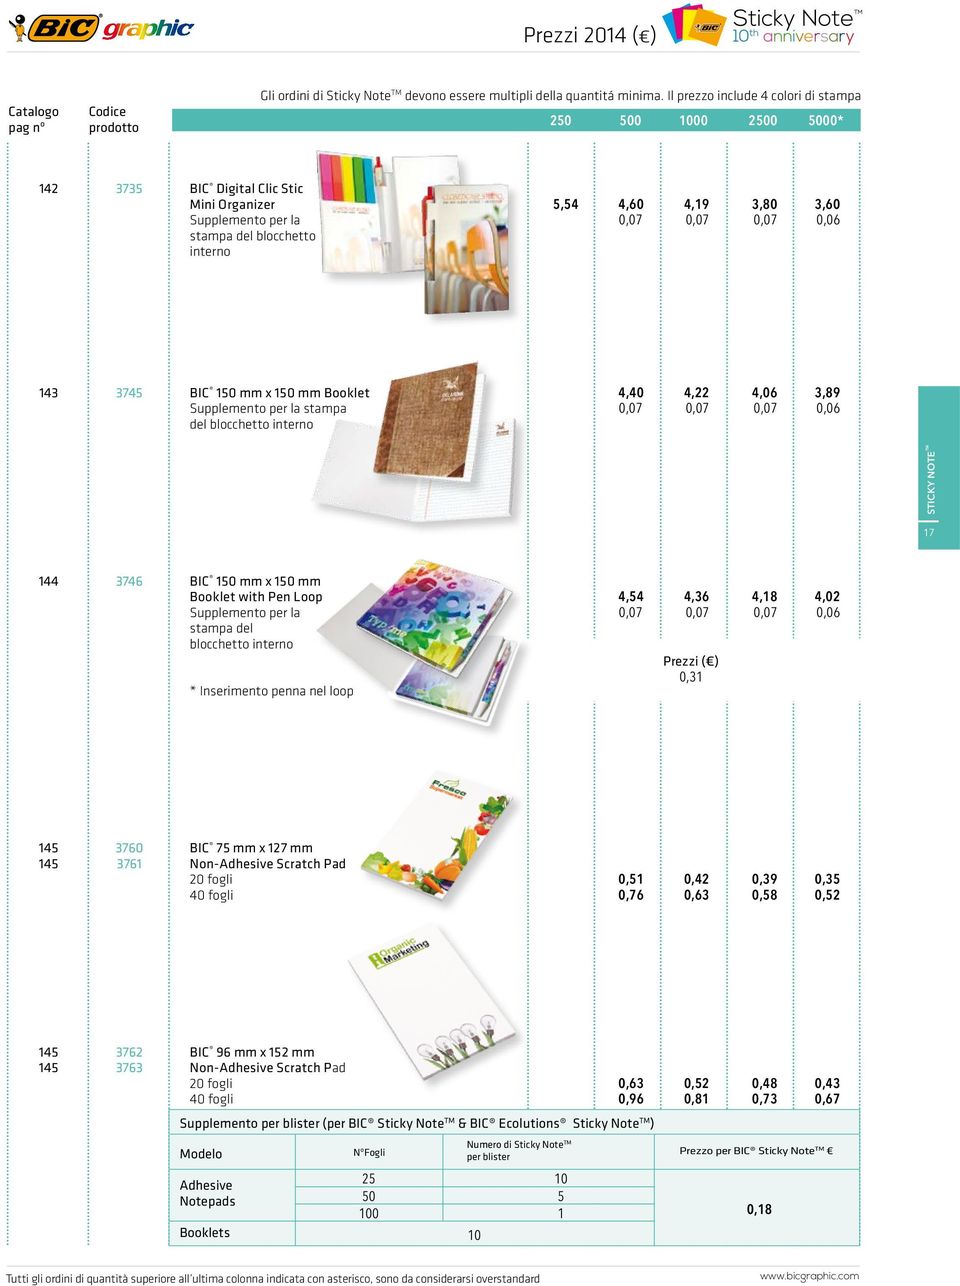 0,06 143 3745 BIC 150 mm x 150 mm Booklet Supplemento per la stampa del blocchetto interno 4,40 4,22 4,06 3,89 0,07 0,07 0,07 0,06 STICKY NOTE TM 17 144 3746 BIC 150 mm x 150 mm Booklet with Pen Loop